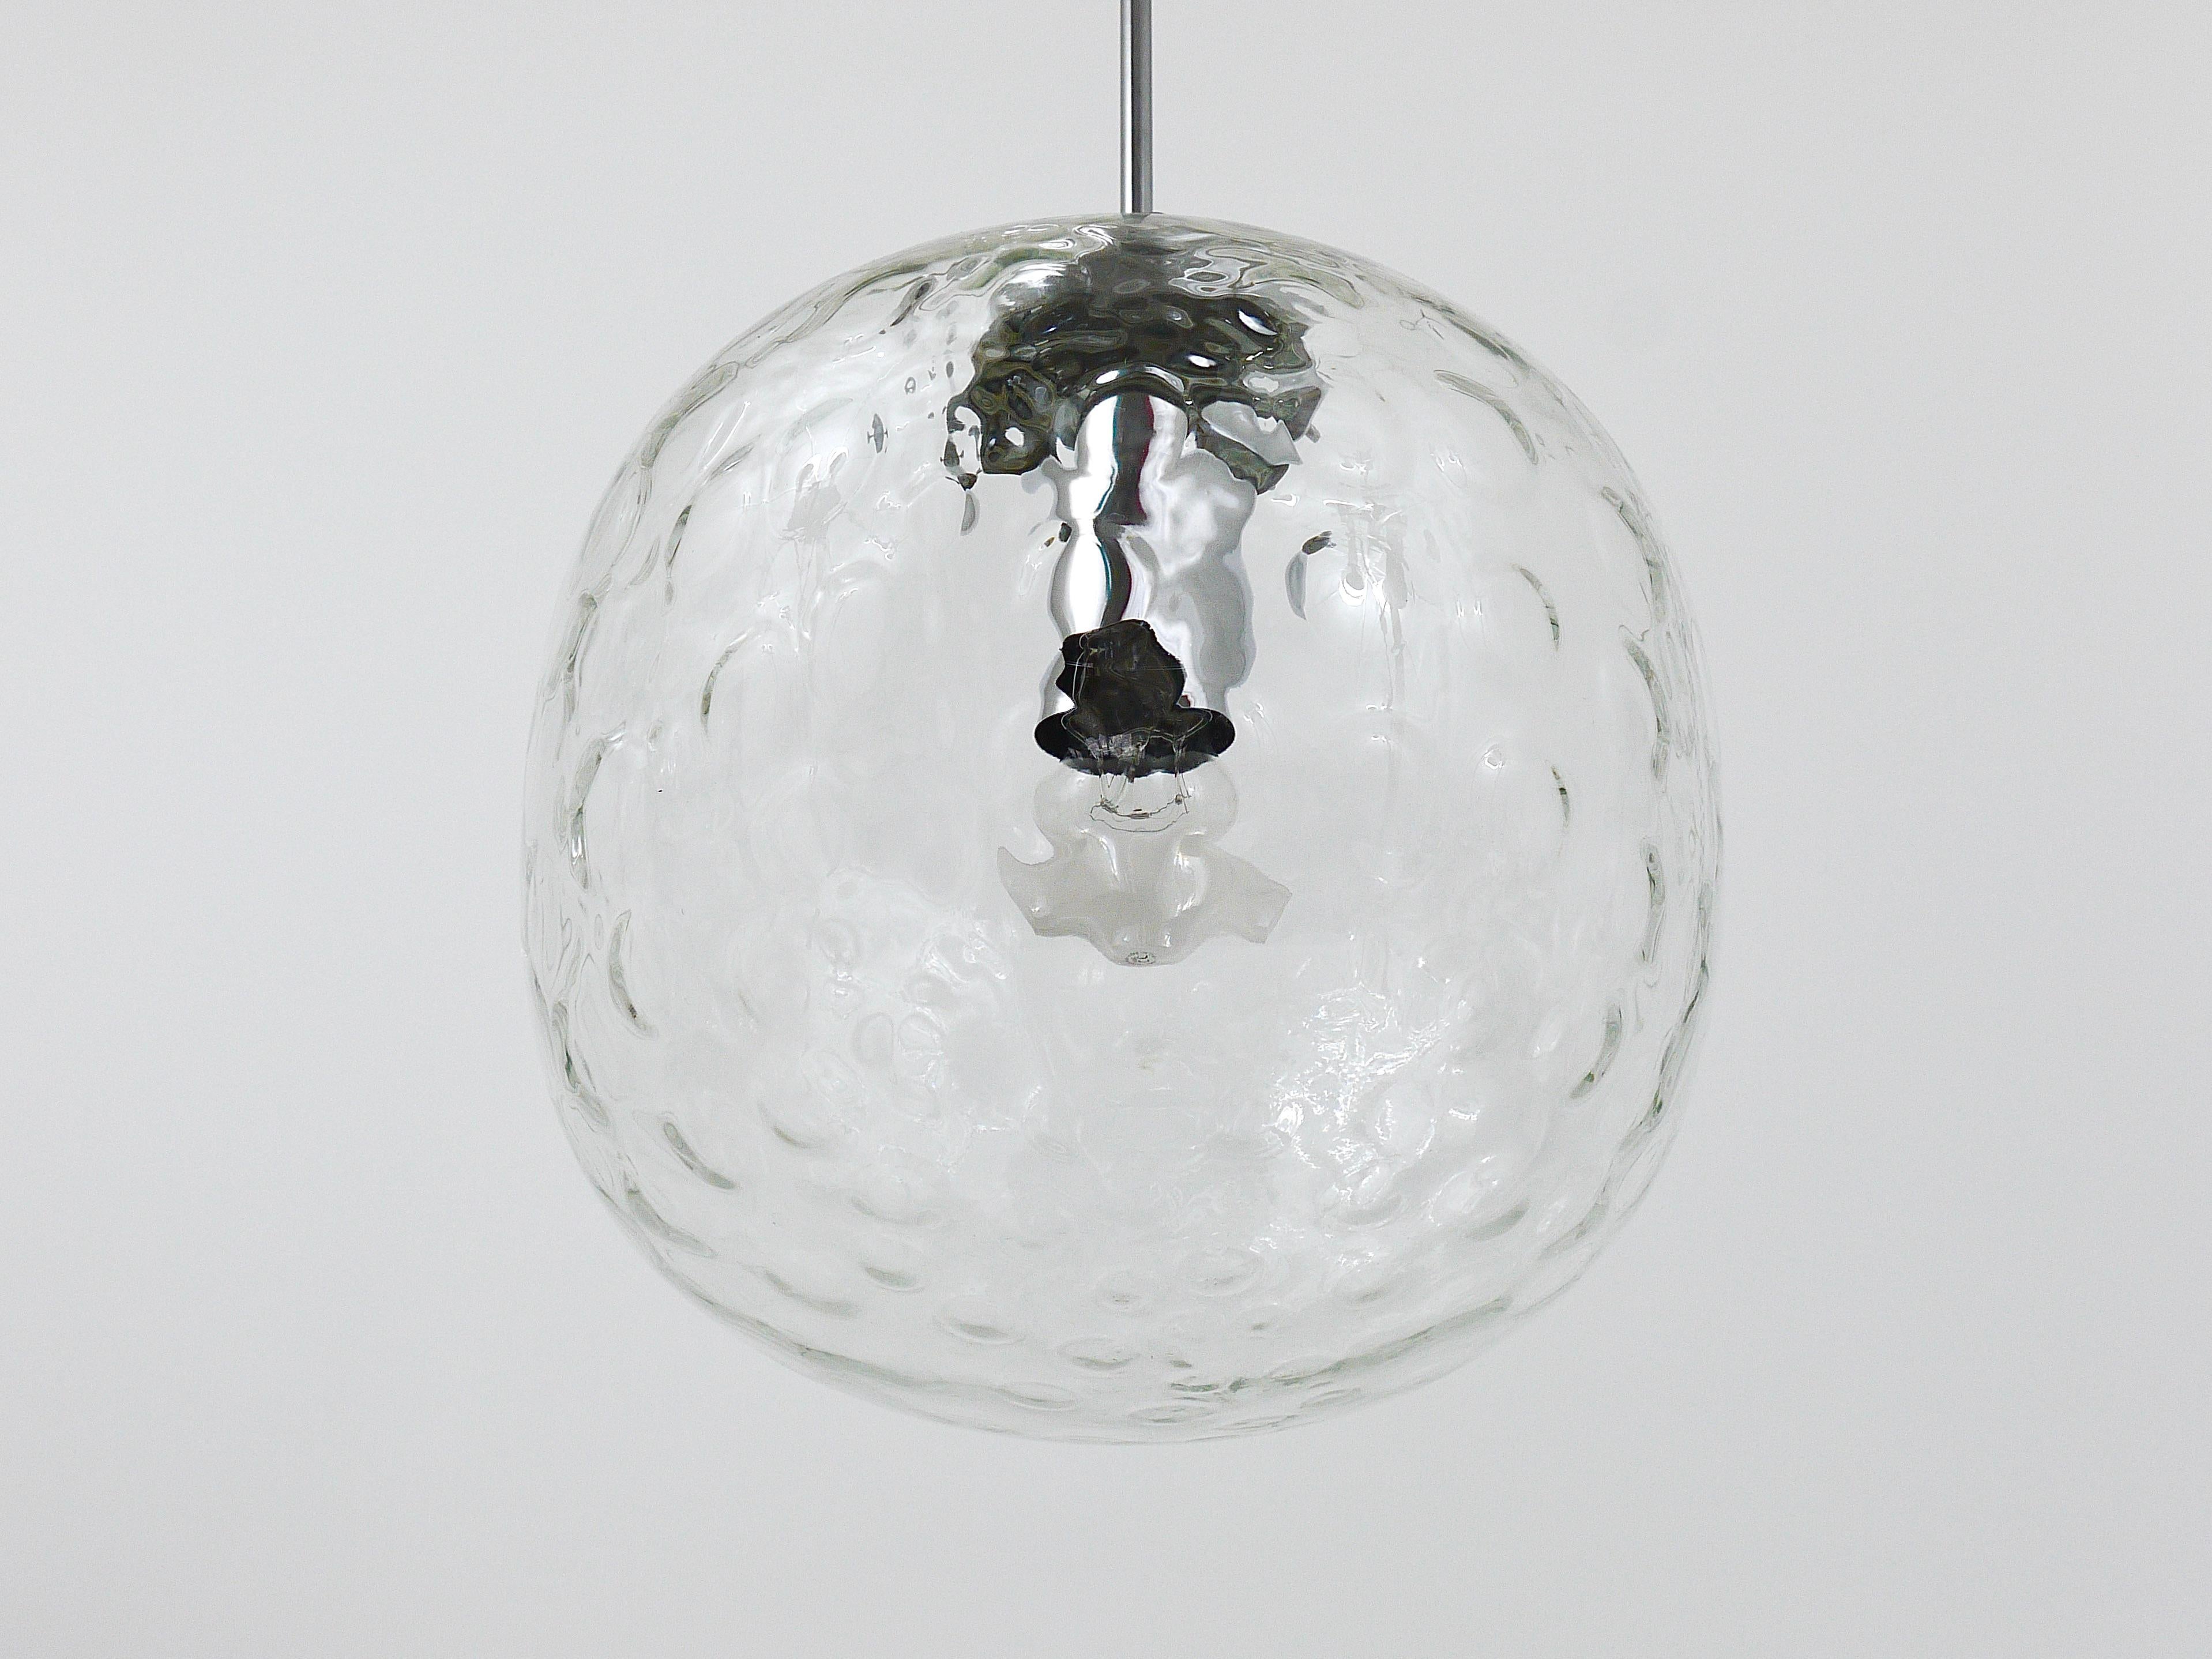 Space Age Large Bubble Melting Glass and Chrome Globe Pendant Lamp, Germany, 1970s For Sale